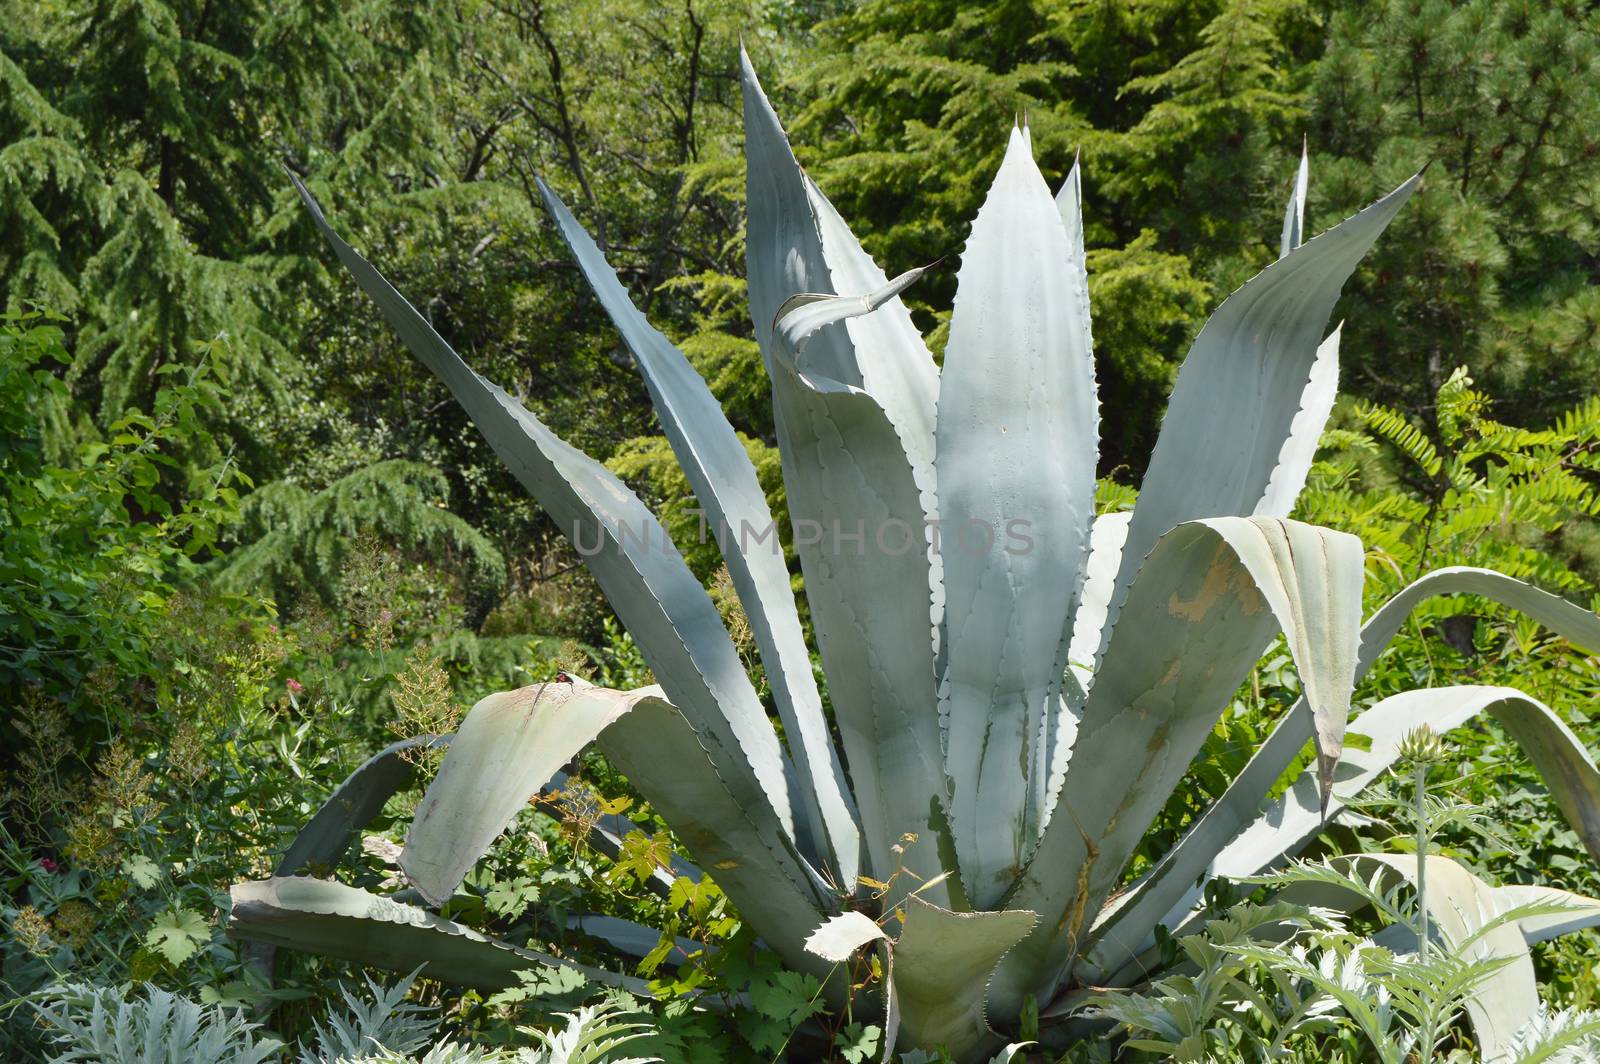 Agave plant in the Park on a Sunny day.